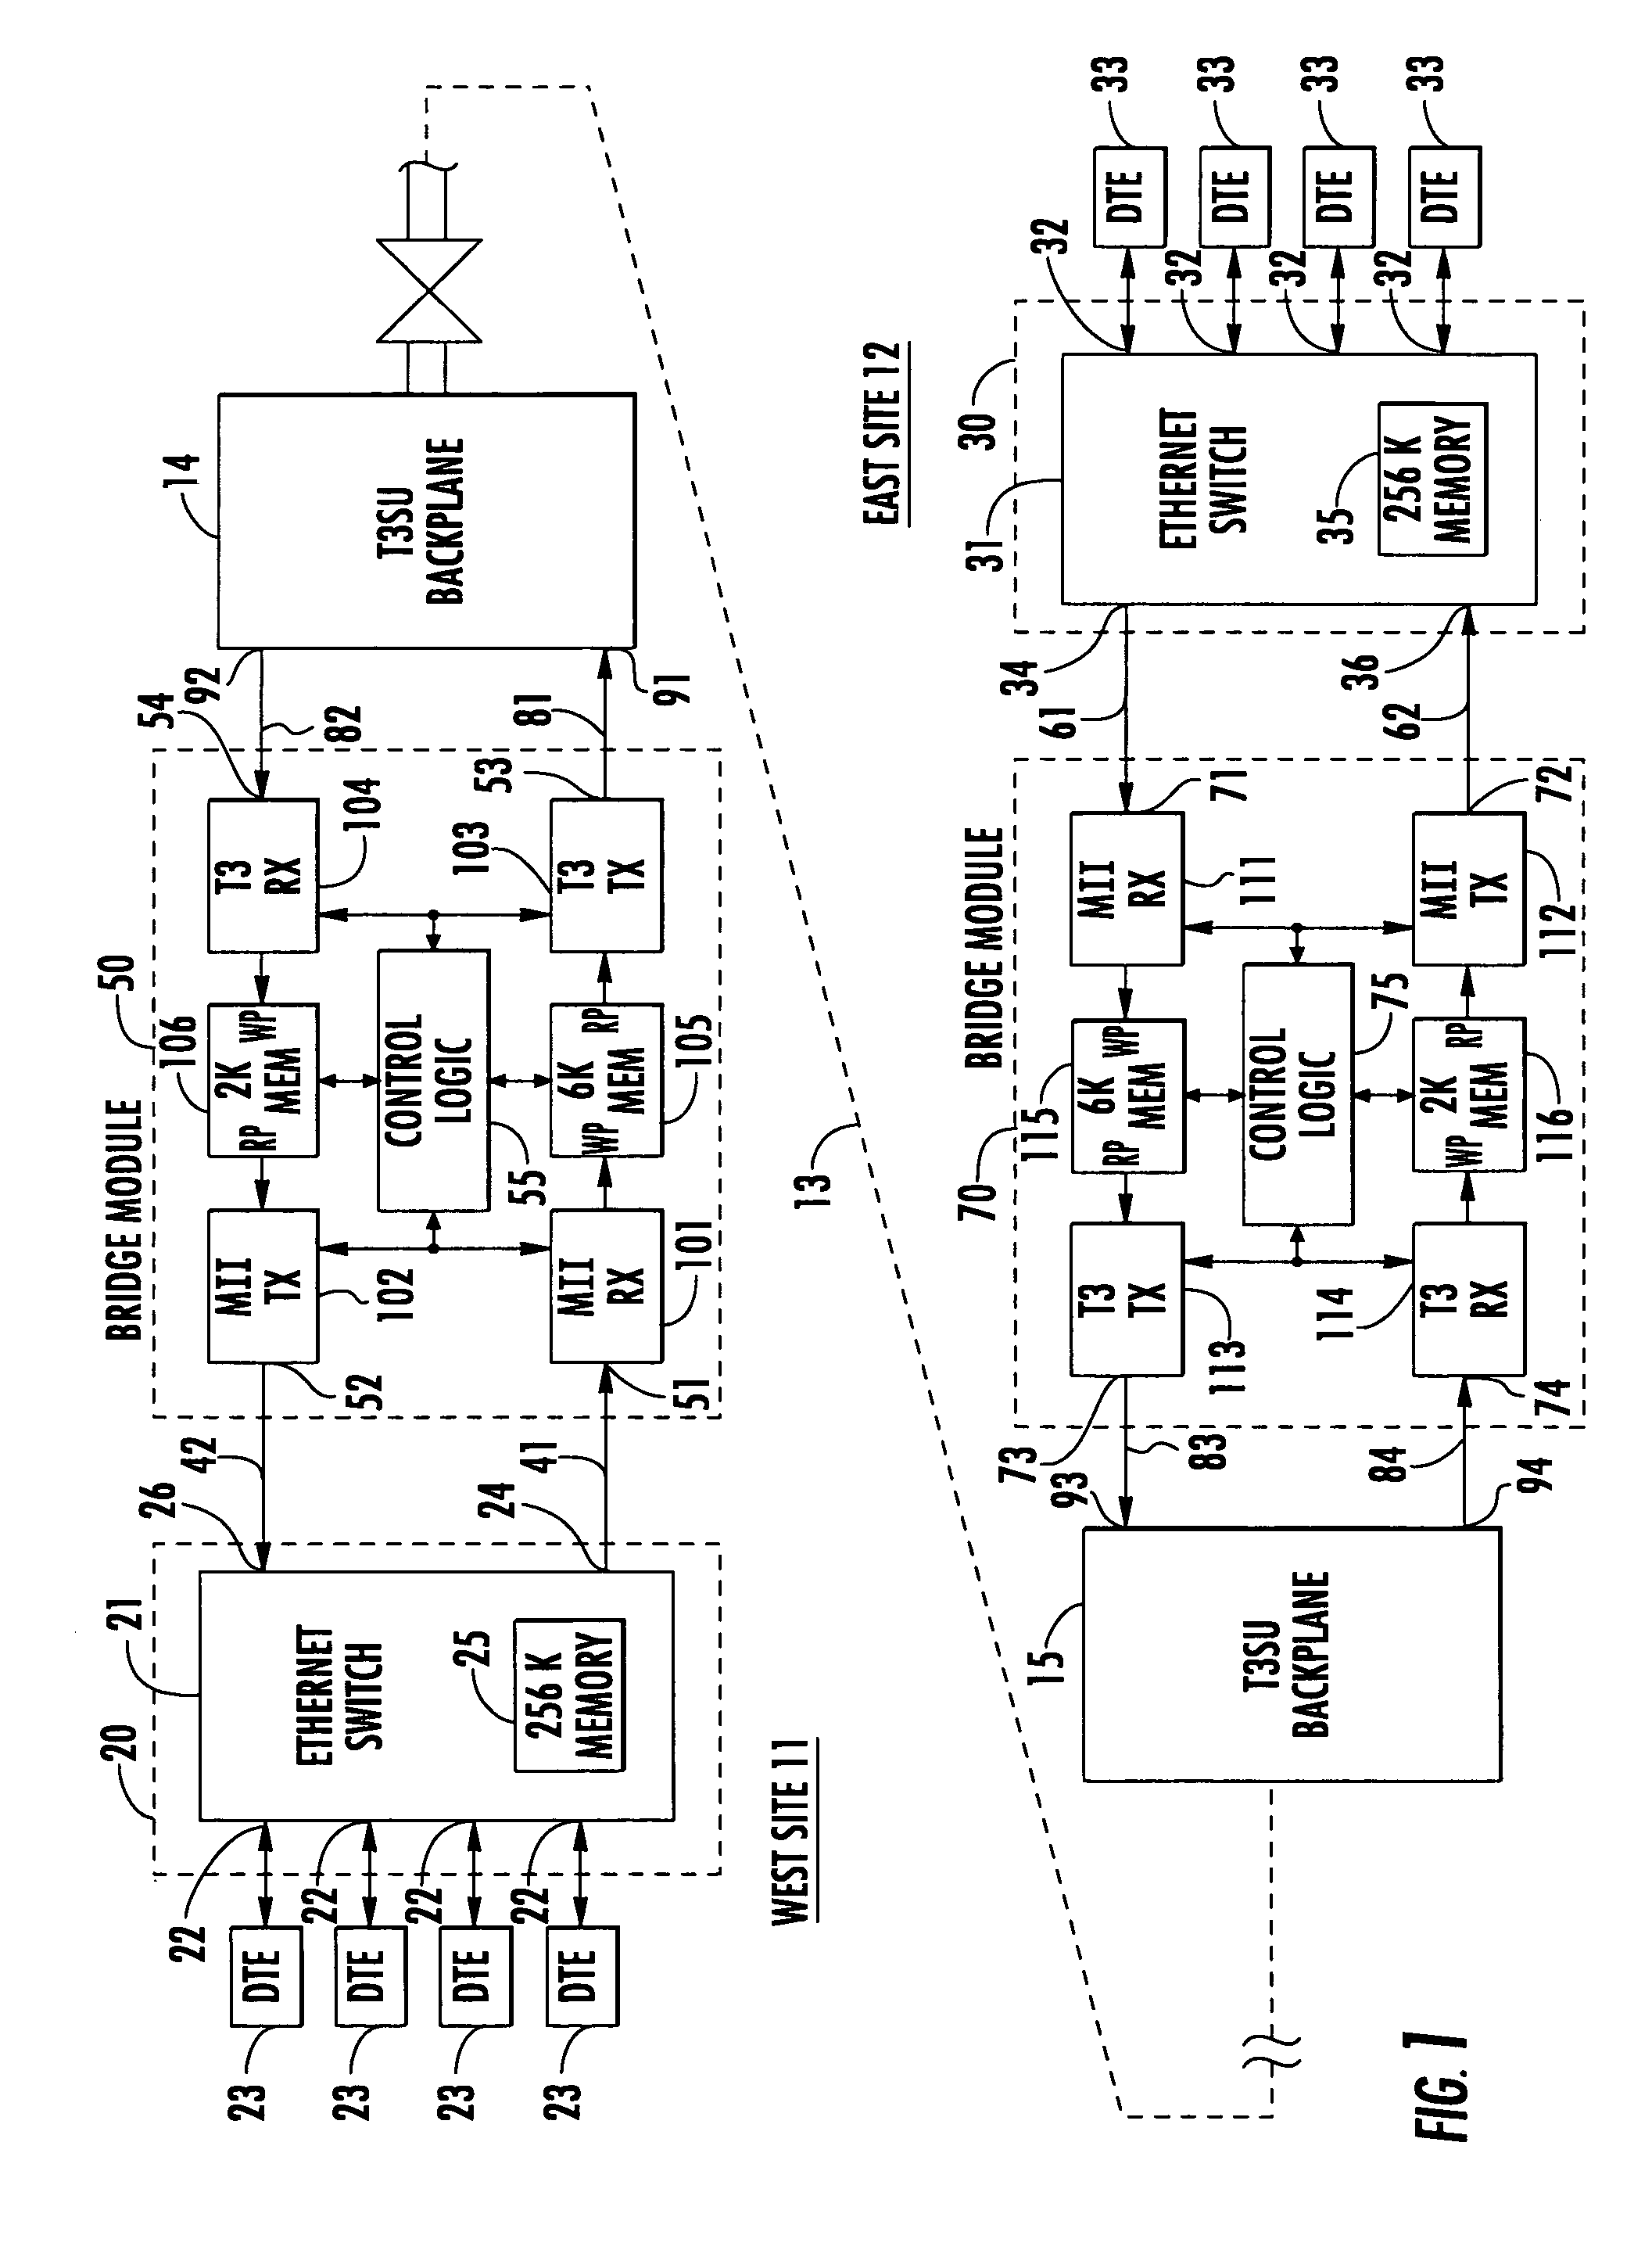 Ethernet LAN interface for T3 network